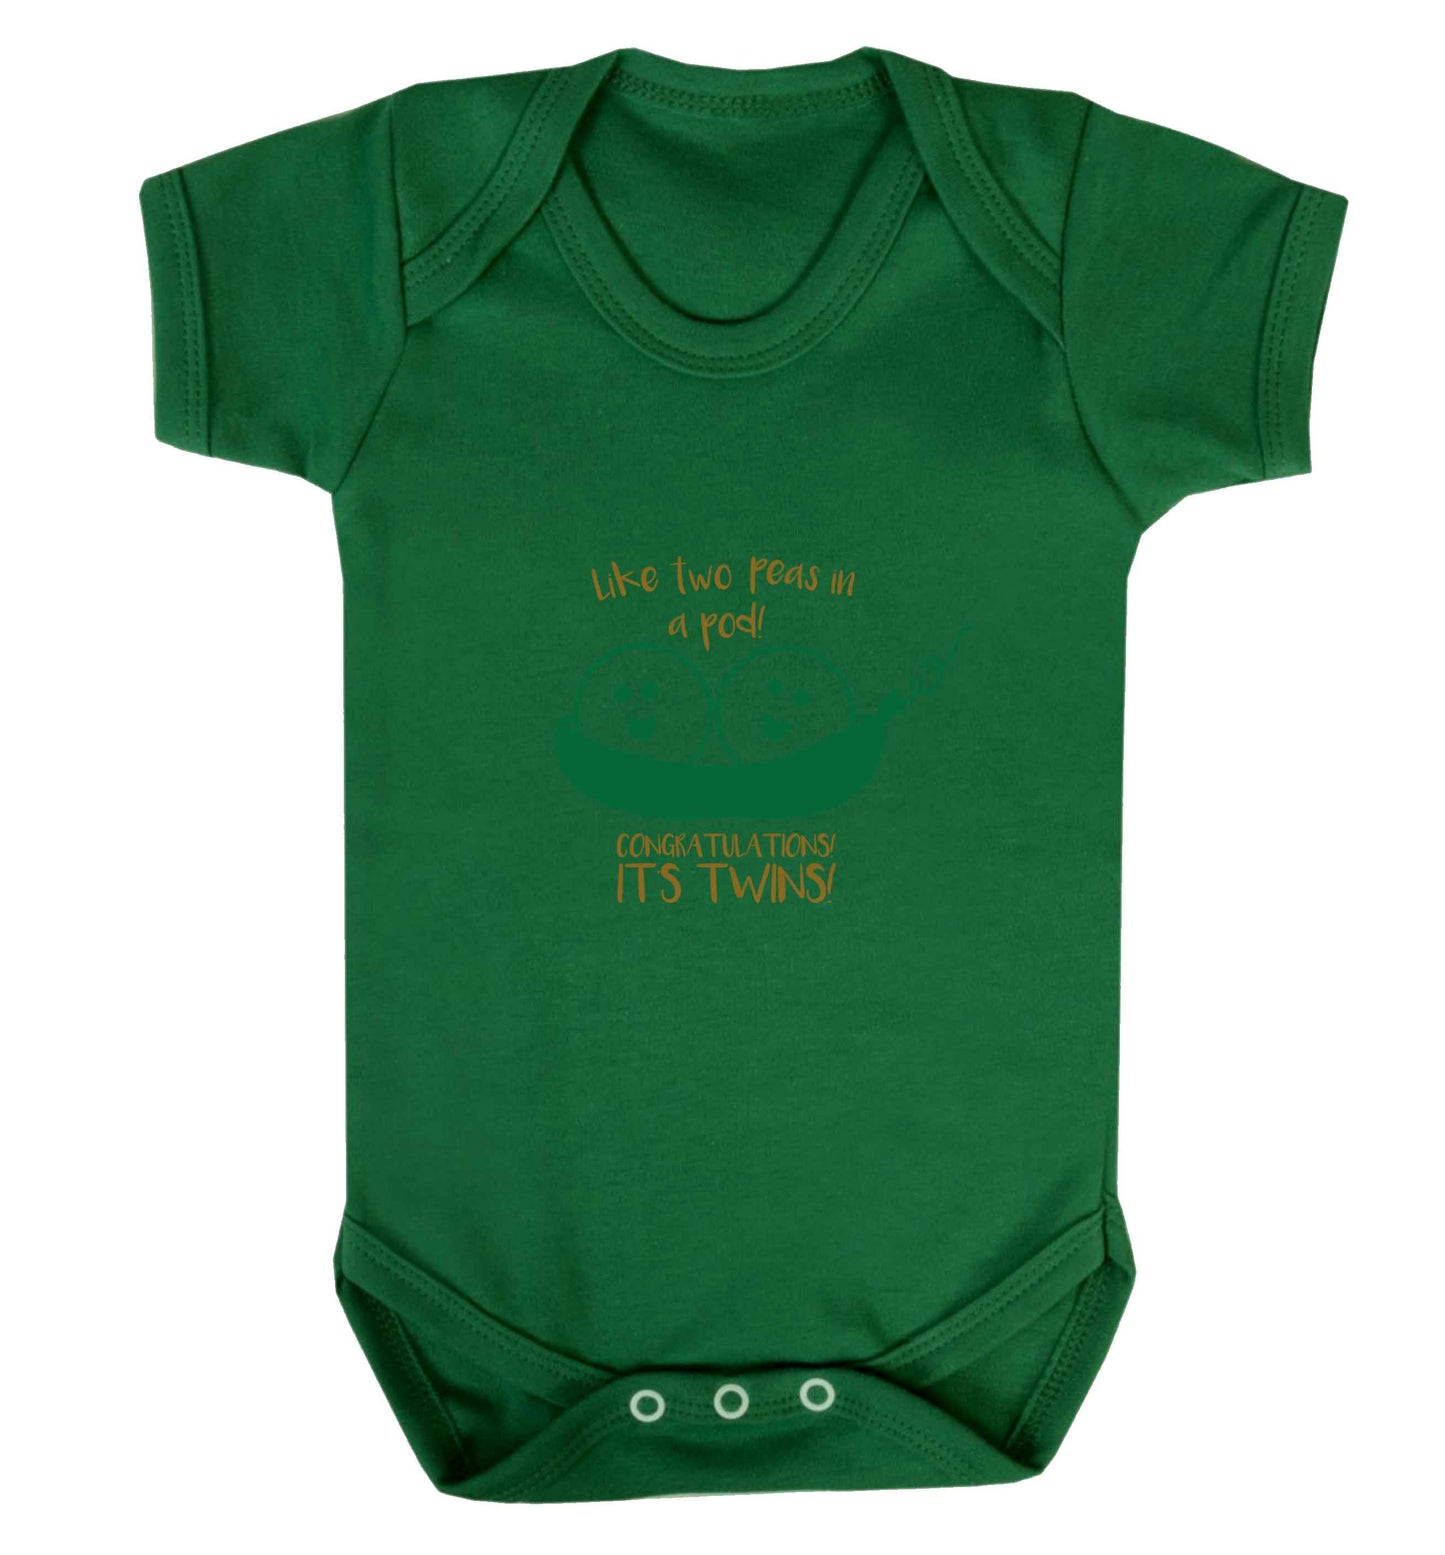 Like two peas in a pod! Congratulations it's twins! baby vest green 18-24 months